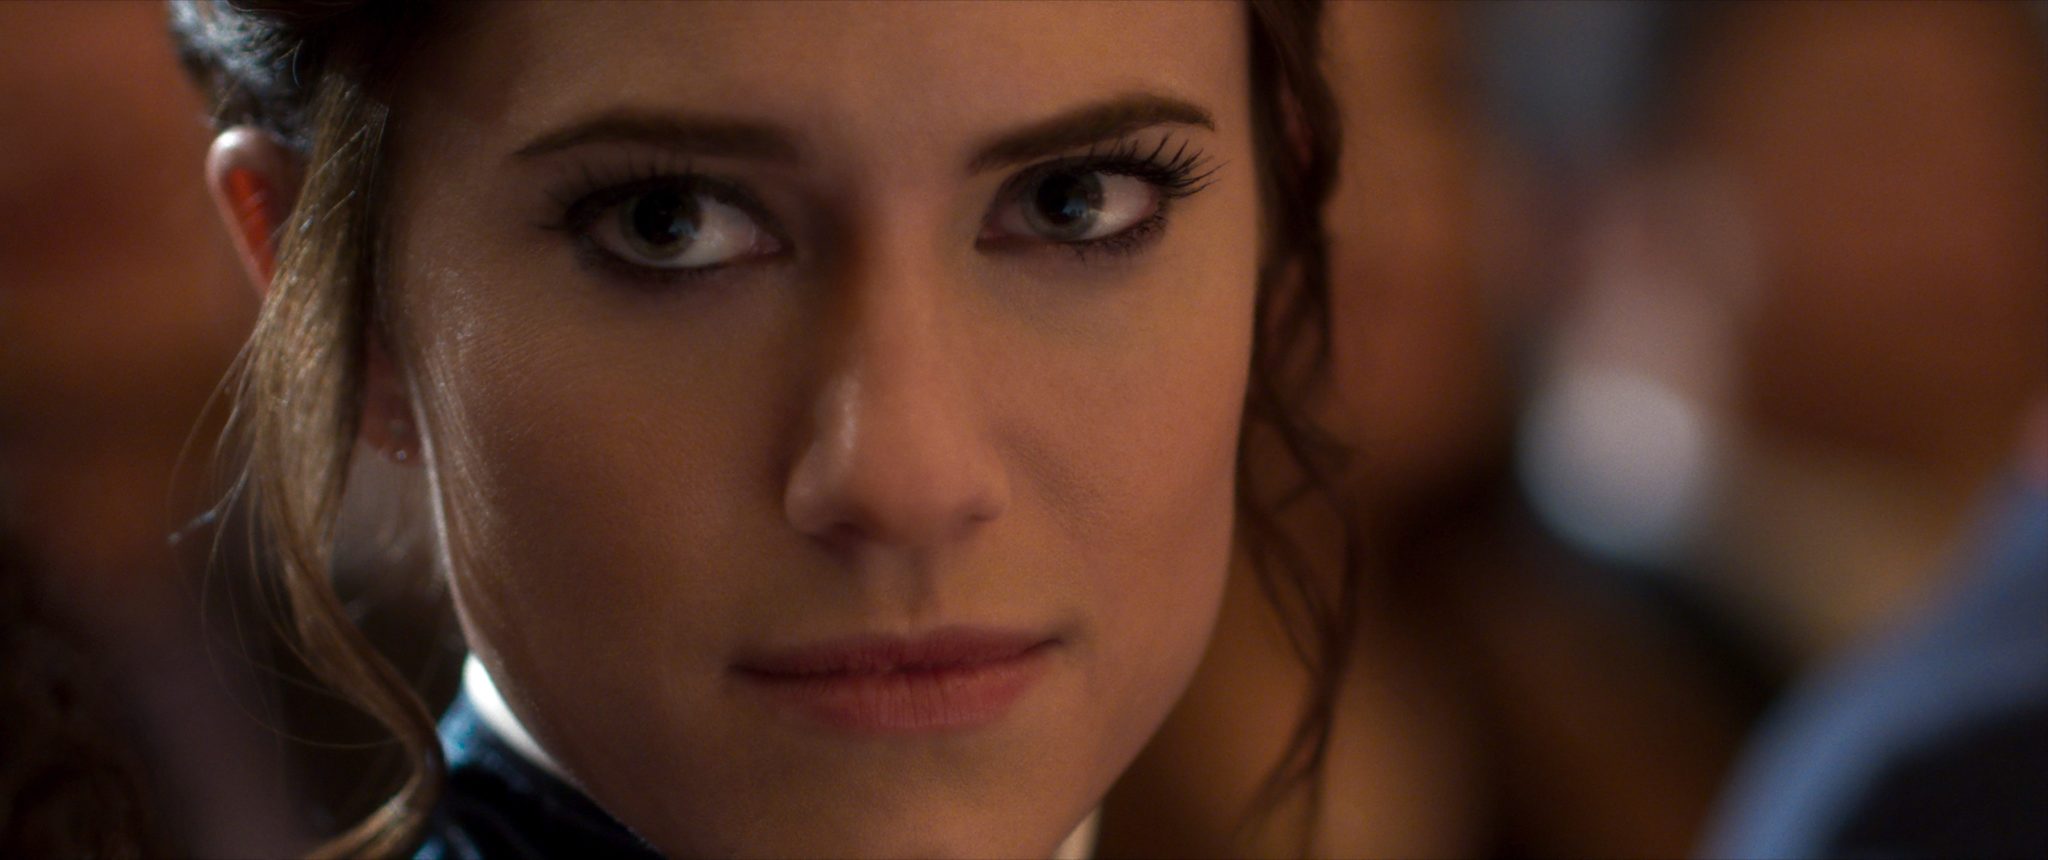 Allison Williams in <i>The Perfection</i>